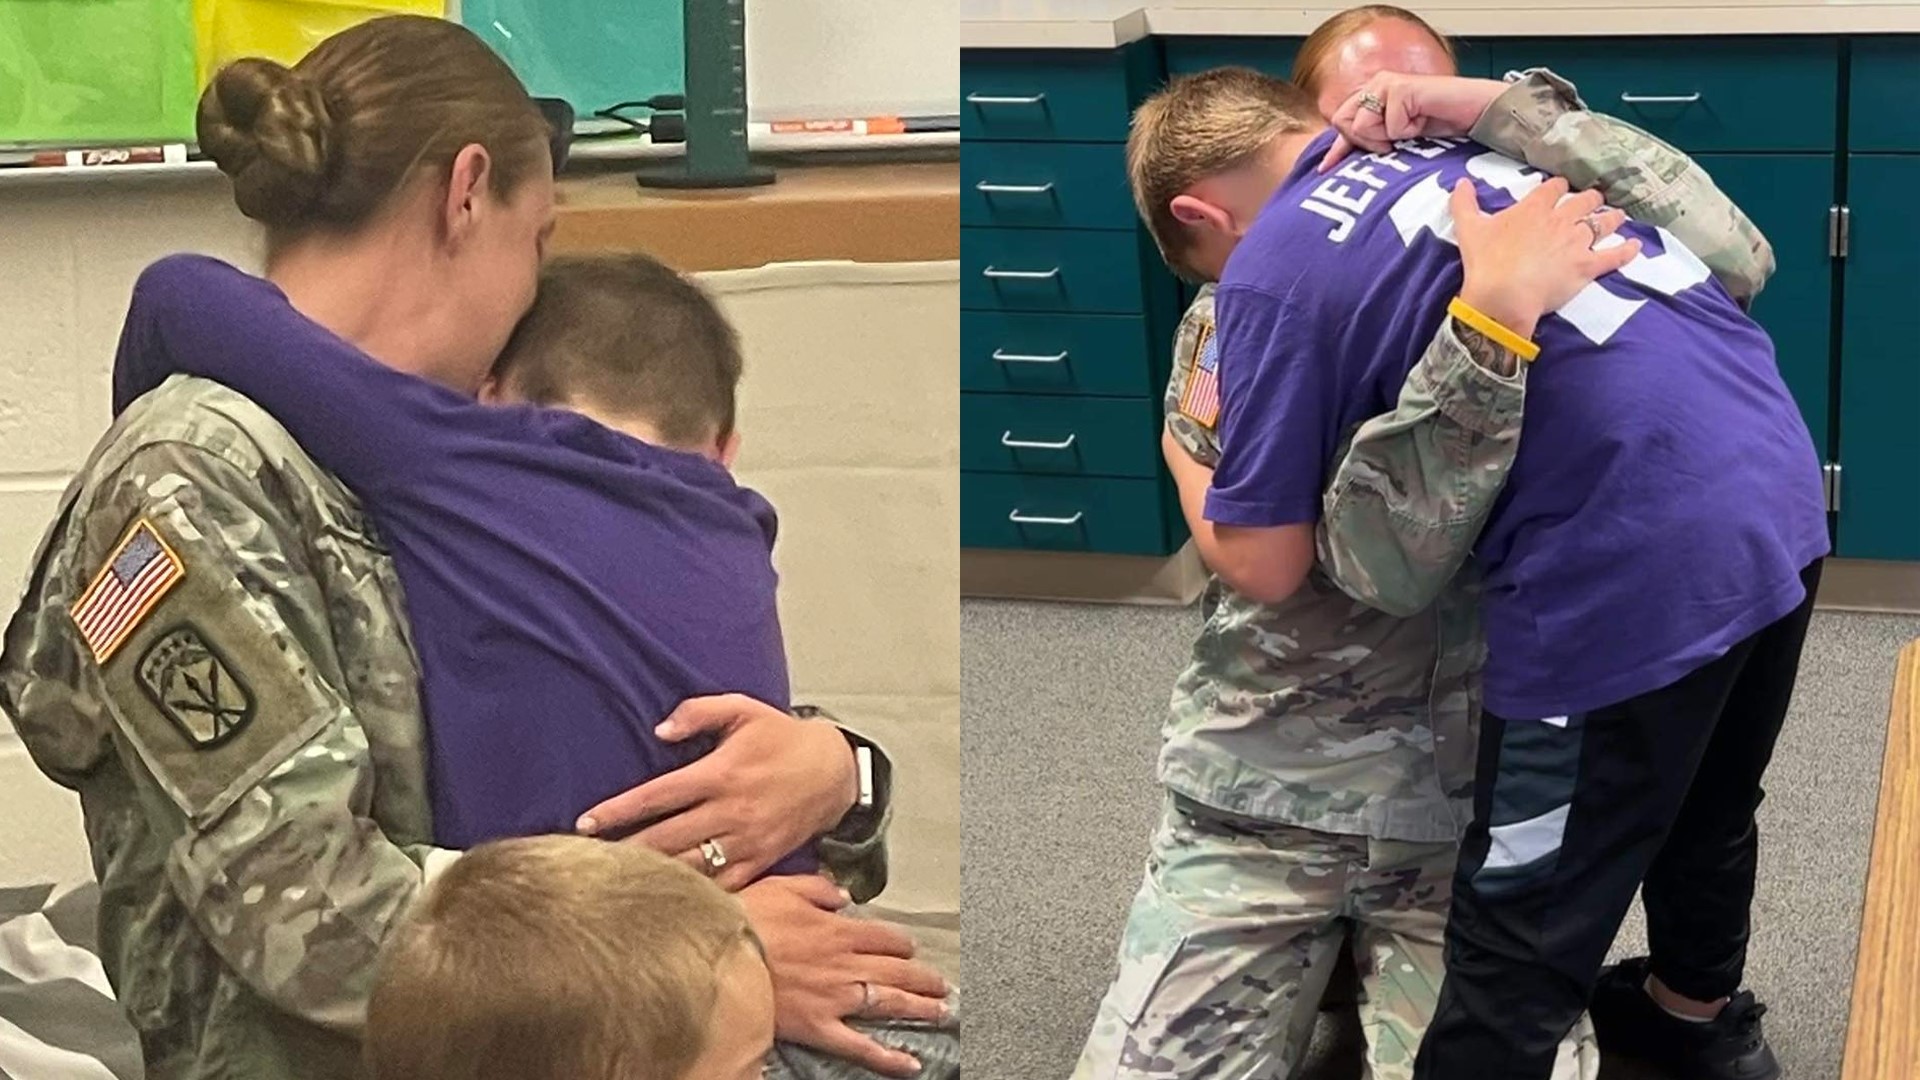 Two Iowa boys received quite the surprise this week: their mom returning from an overseas deployment in the Iowa National Guard.